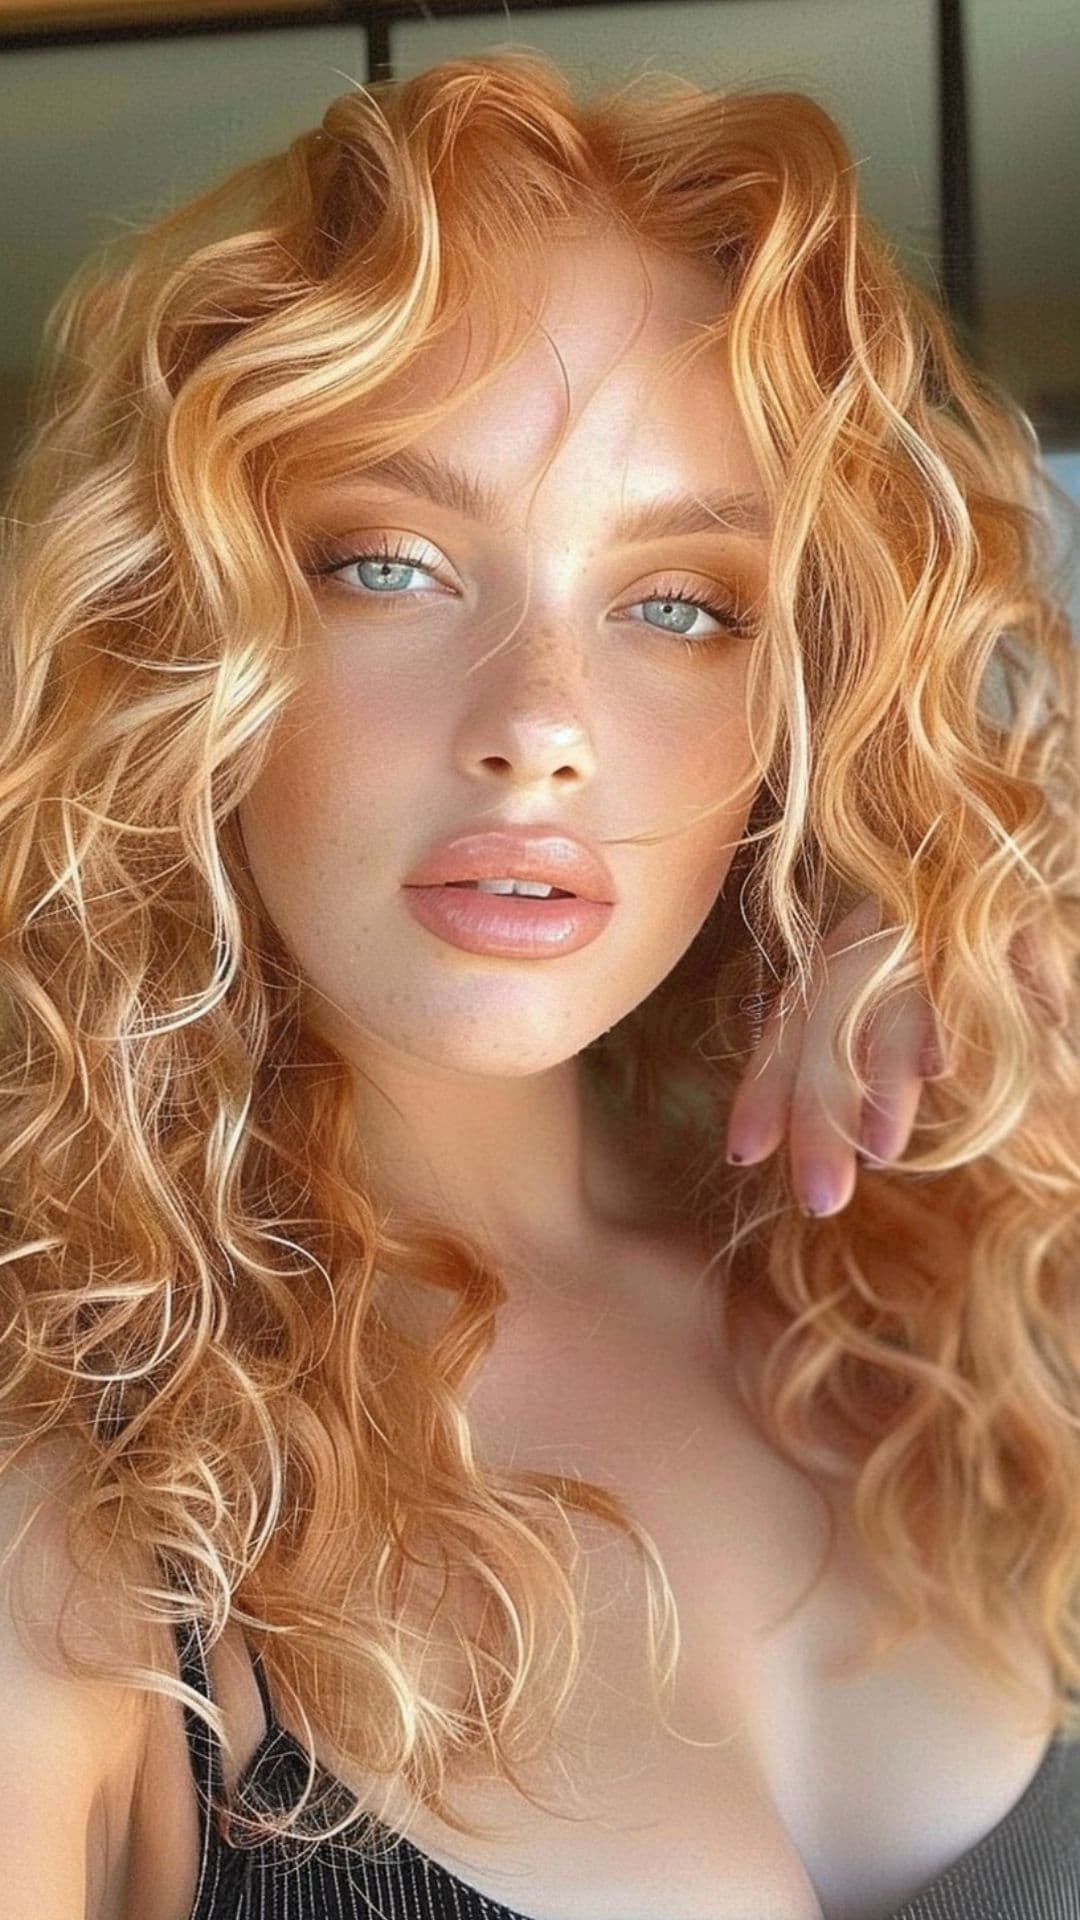 A woman modelling a strawberry blonde curly hair.